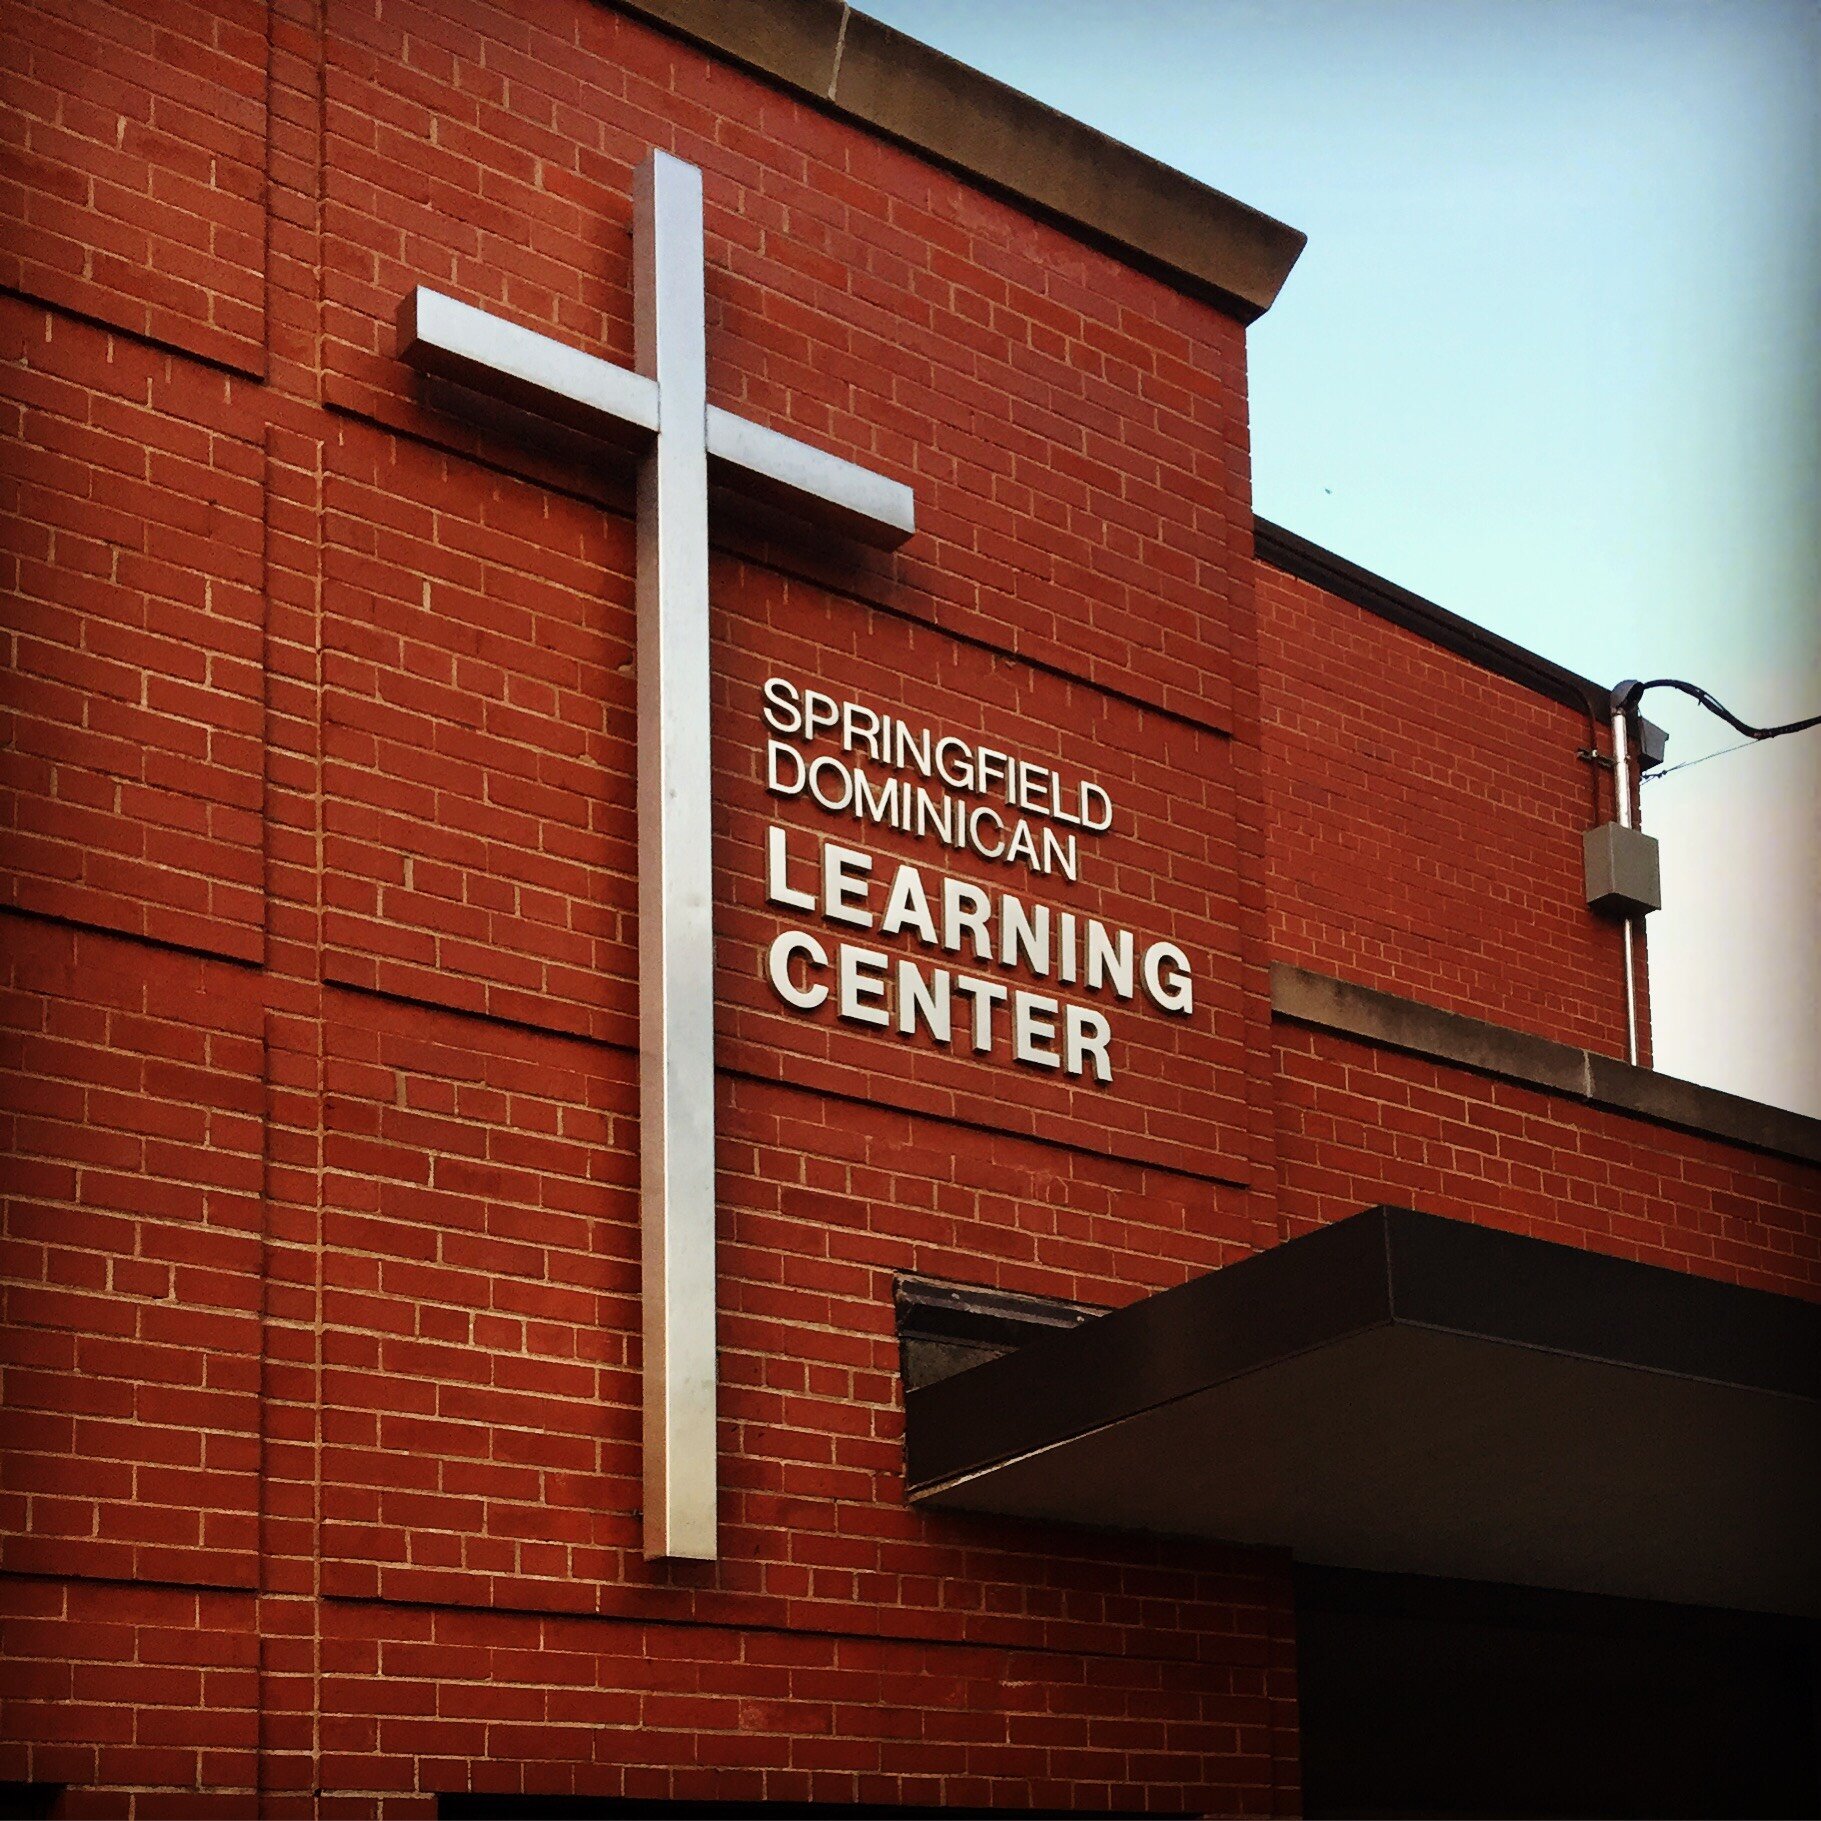 Springfield Dominican Learning Center